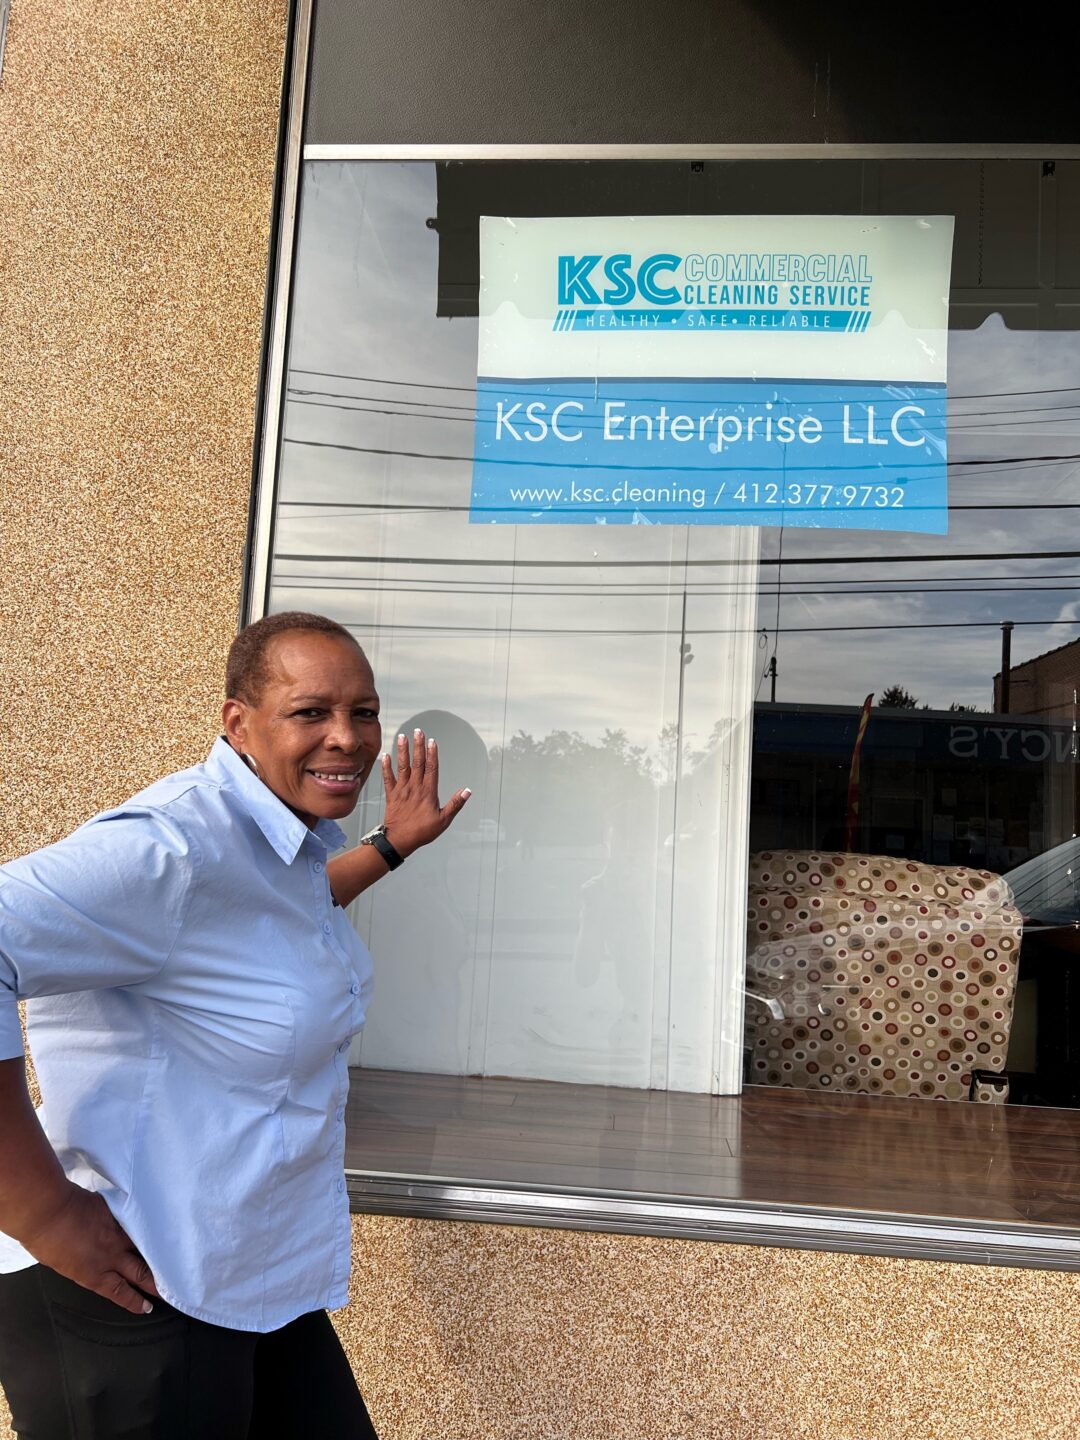 KSC Commercial Cleaning Service